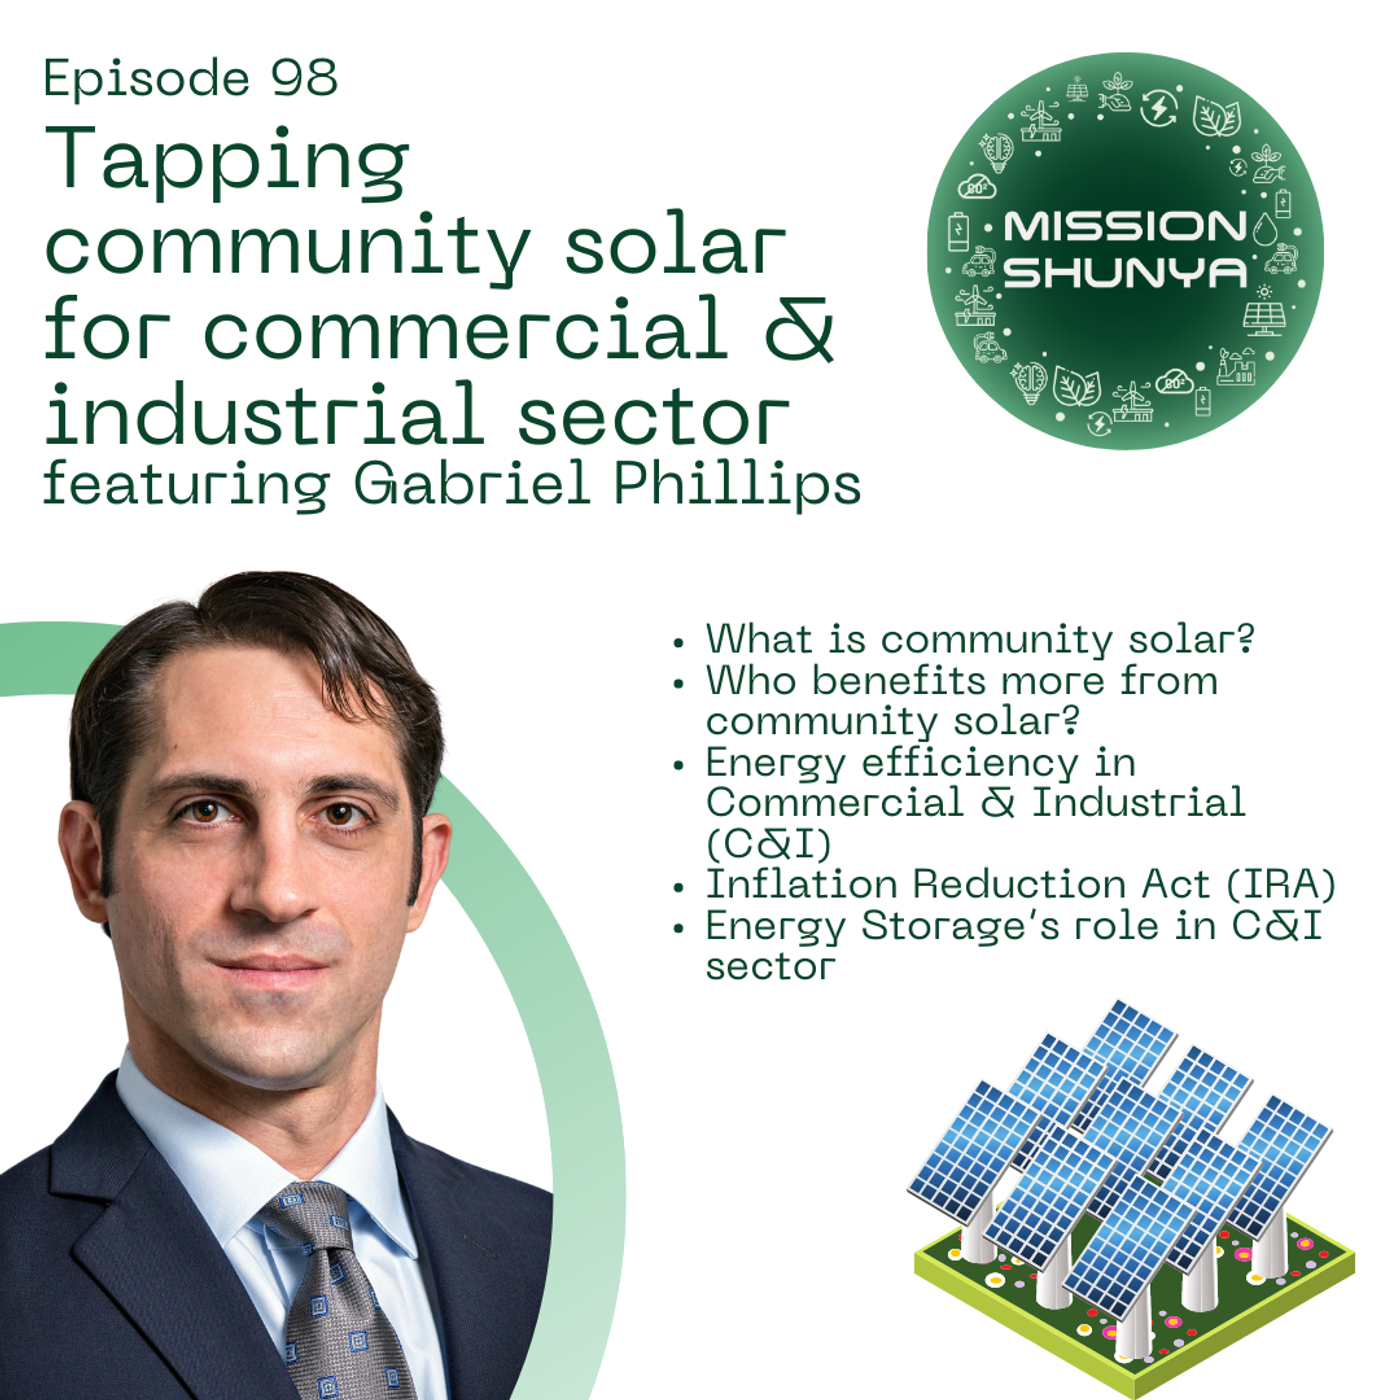 98: Tapping community solar for commercial & industrial sector ft. Gabriel Phillips, Catalyst Power